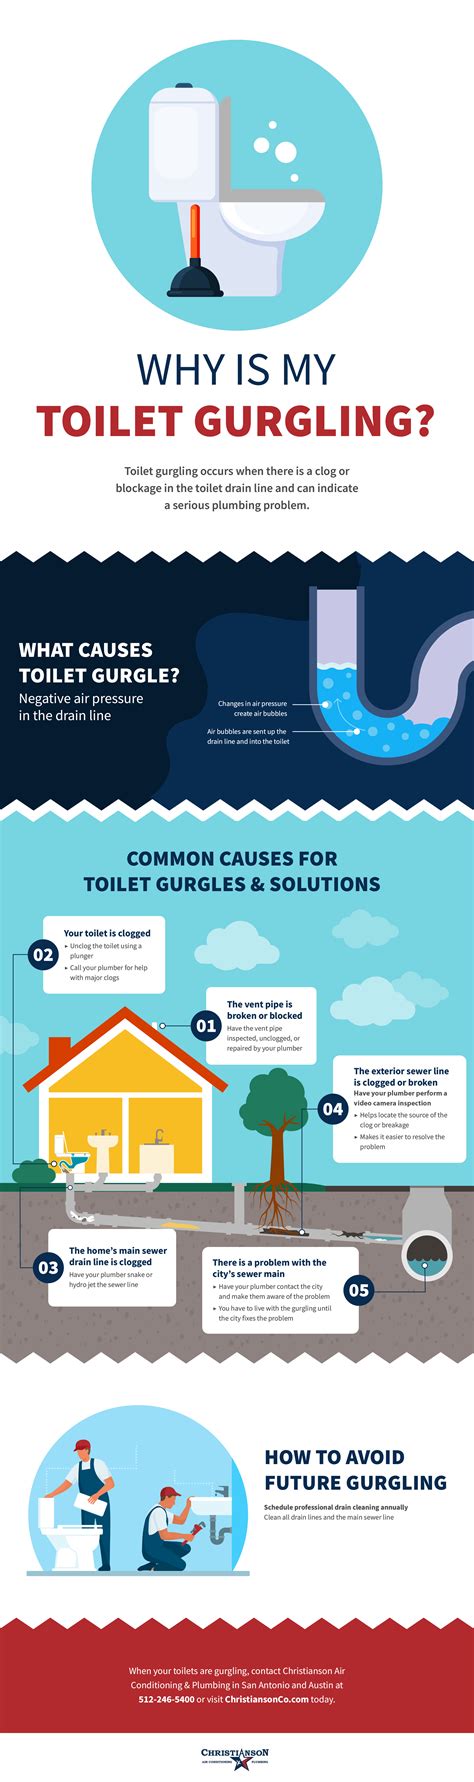 Common Reasons Why Your Toilet Is Gurgling